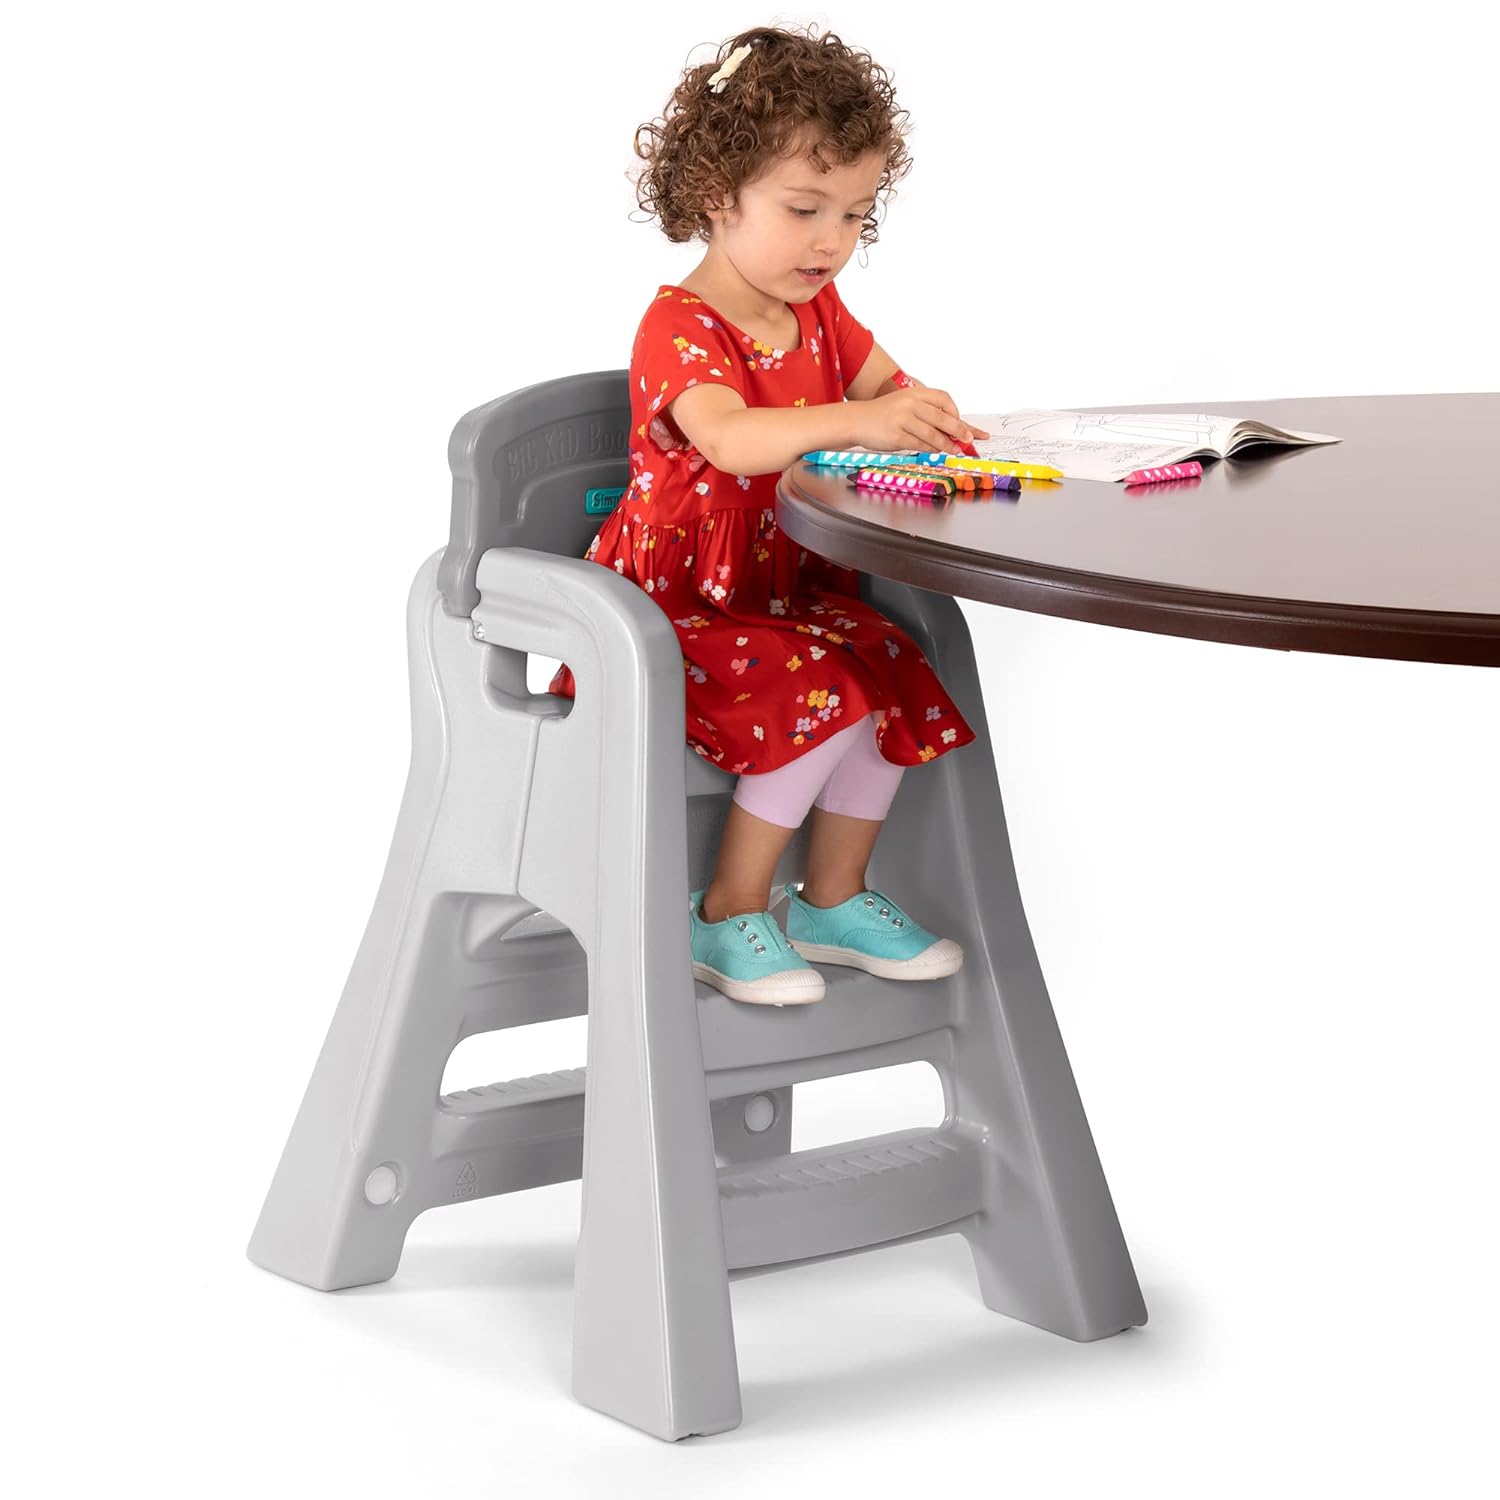 https://bigbigmart.com/wp-content/uploads/2023/10/Simplay3-Big-Kids-Booster-Seat-Lightweight-Toddler-Booster-Chair-for-Dining-Table-and-Kitchen-Toddler-Kitchen-Helper-Made-in-USA.jpg